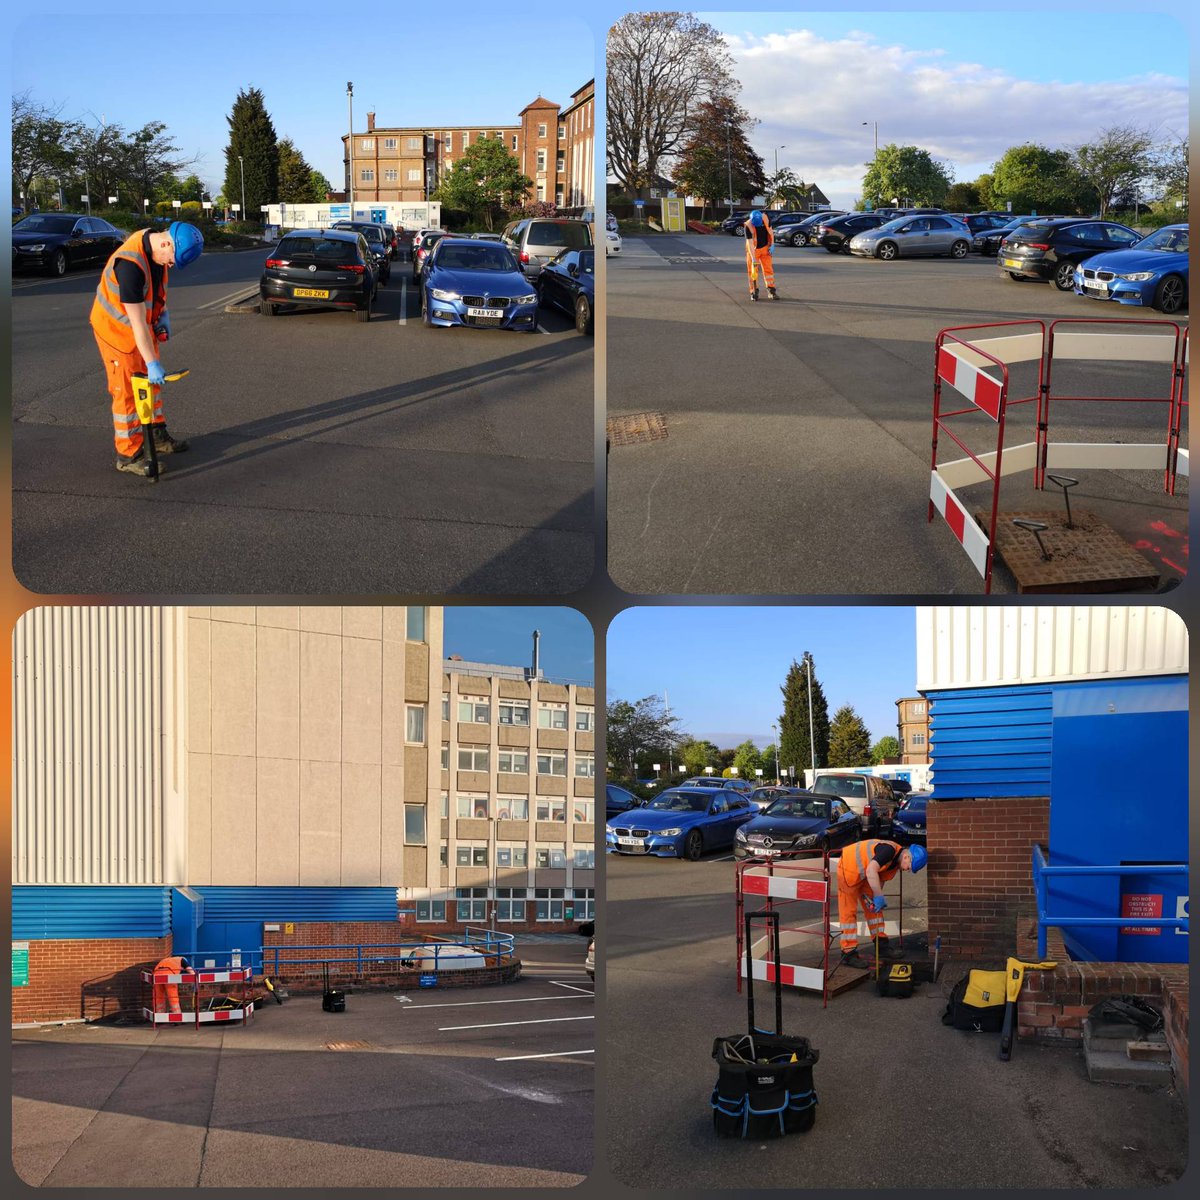 Whilst NHS staff are working hard, the hospitals & infrastructure are under pressure & need maintenance.

This week we have been undertaking essential #UndergroundUtilitiesSurvey at Doncaster Royal Infirmary. 
@DBH_NHSFT #NHSHeroes #UtilitiesSurvey #FacilitiesMgmt #WorldFMDay2020